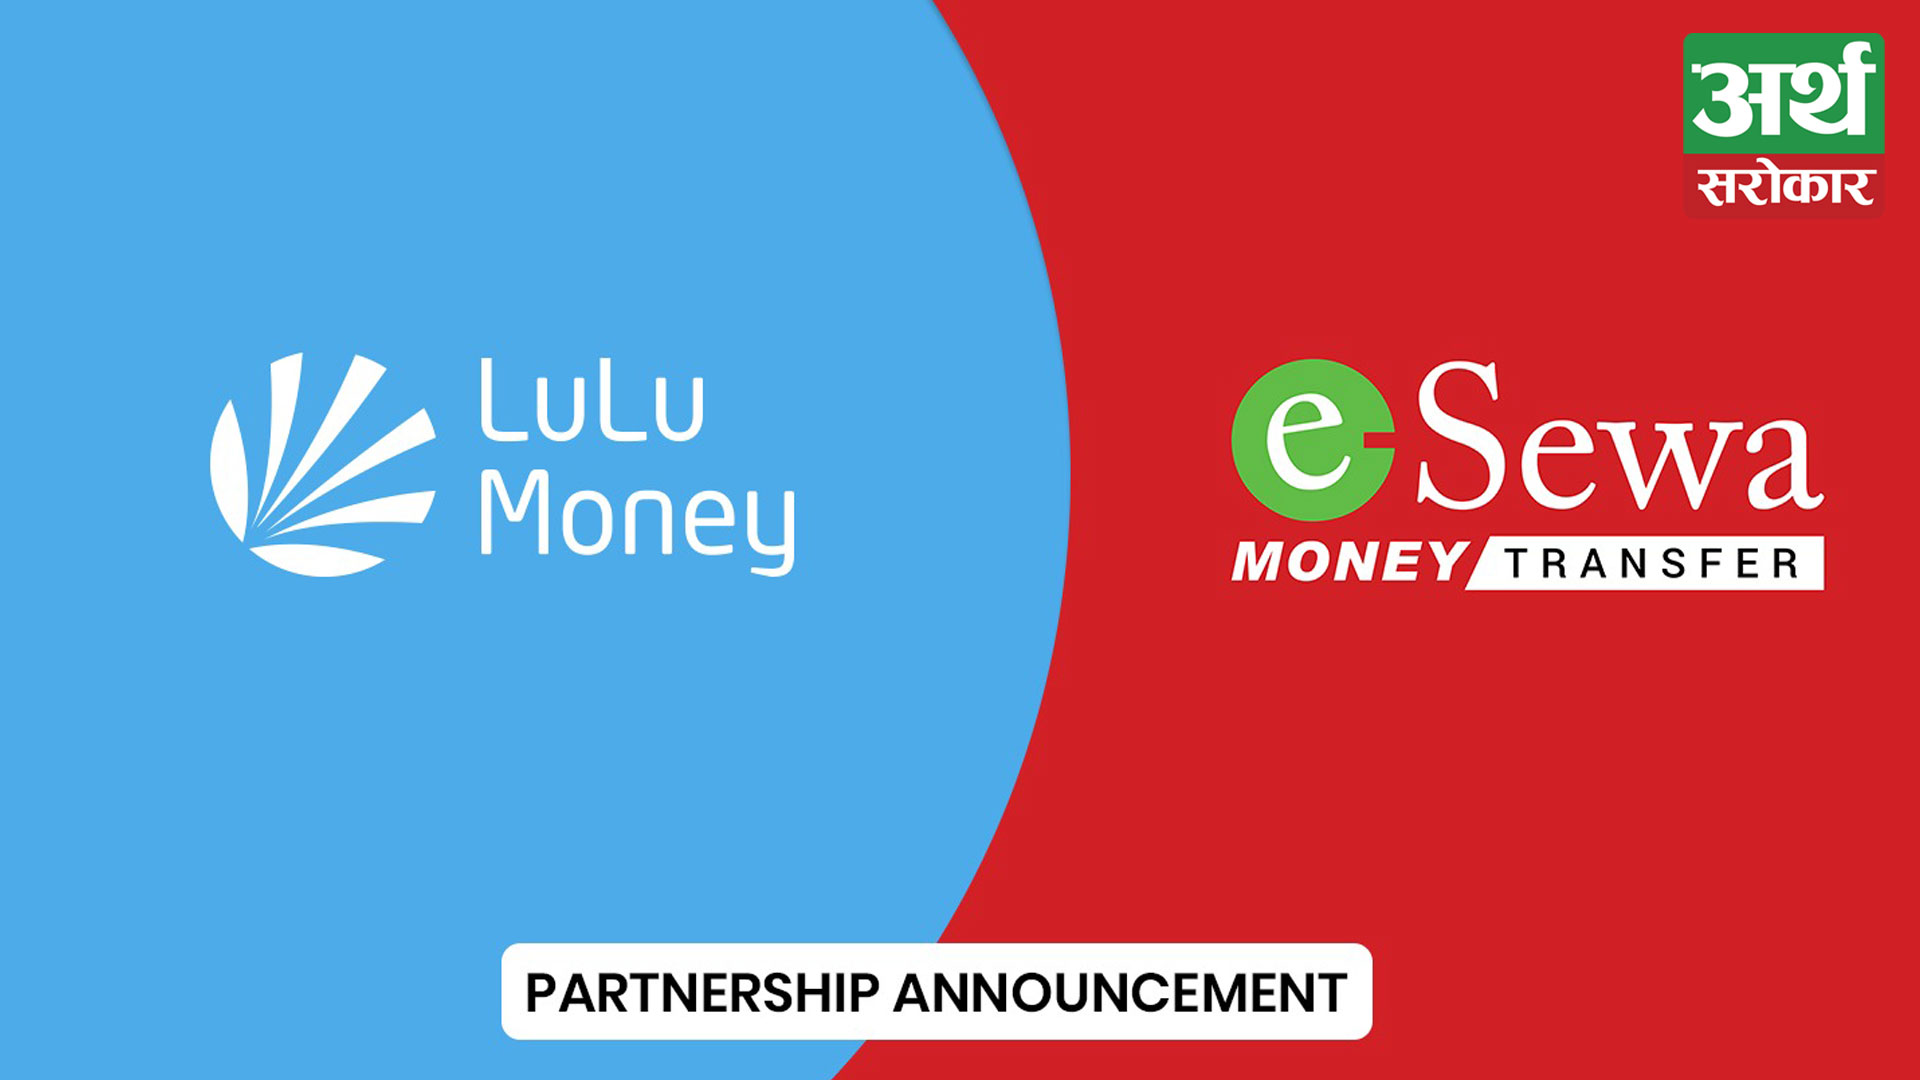 Esewa Money Transfer partners with Lulu Money Singapore to facilitate remittance services for Nepalese migrants and their families.